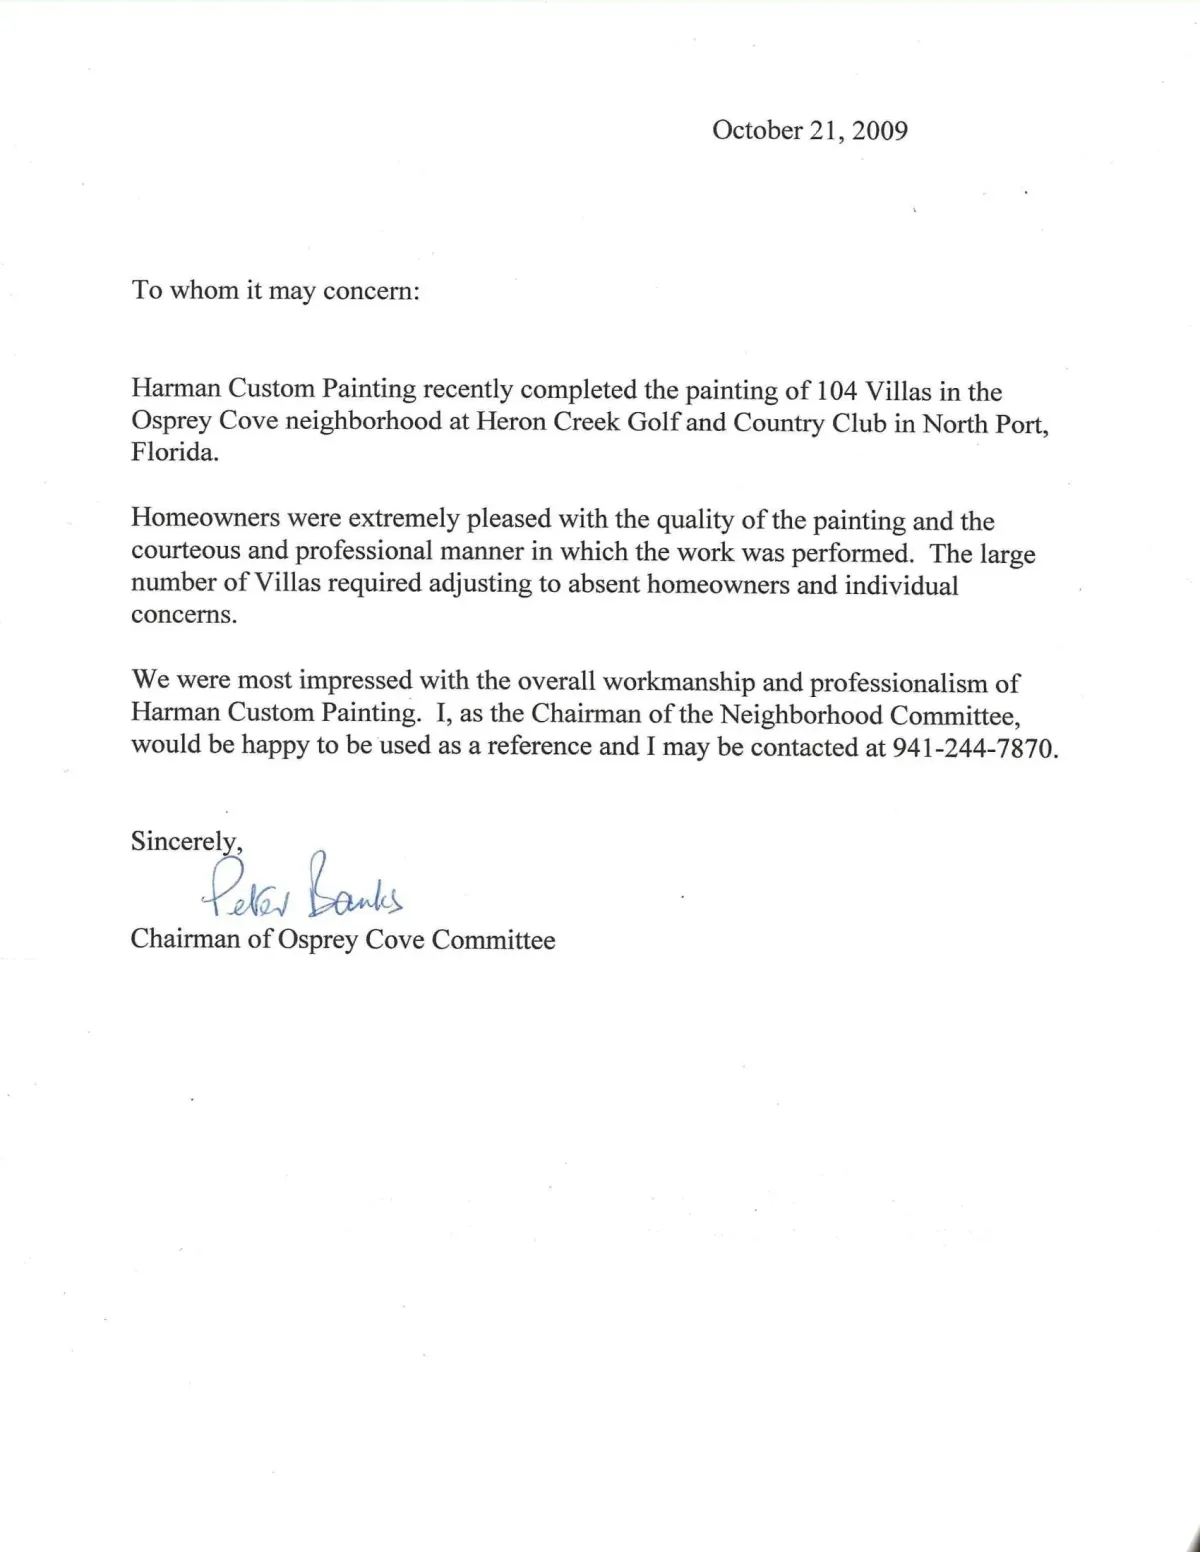 Letter of Recommendation - Chairman of Osprey cove Committee